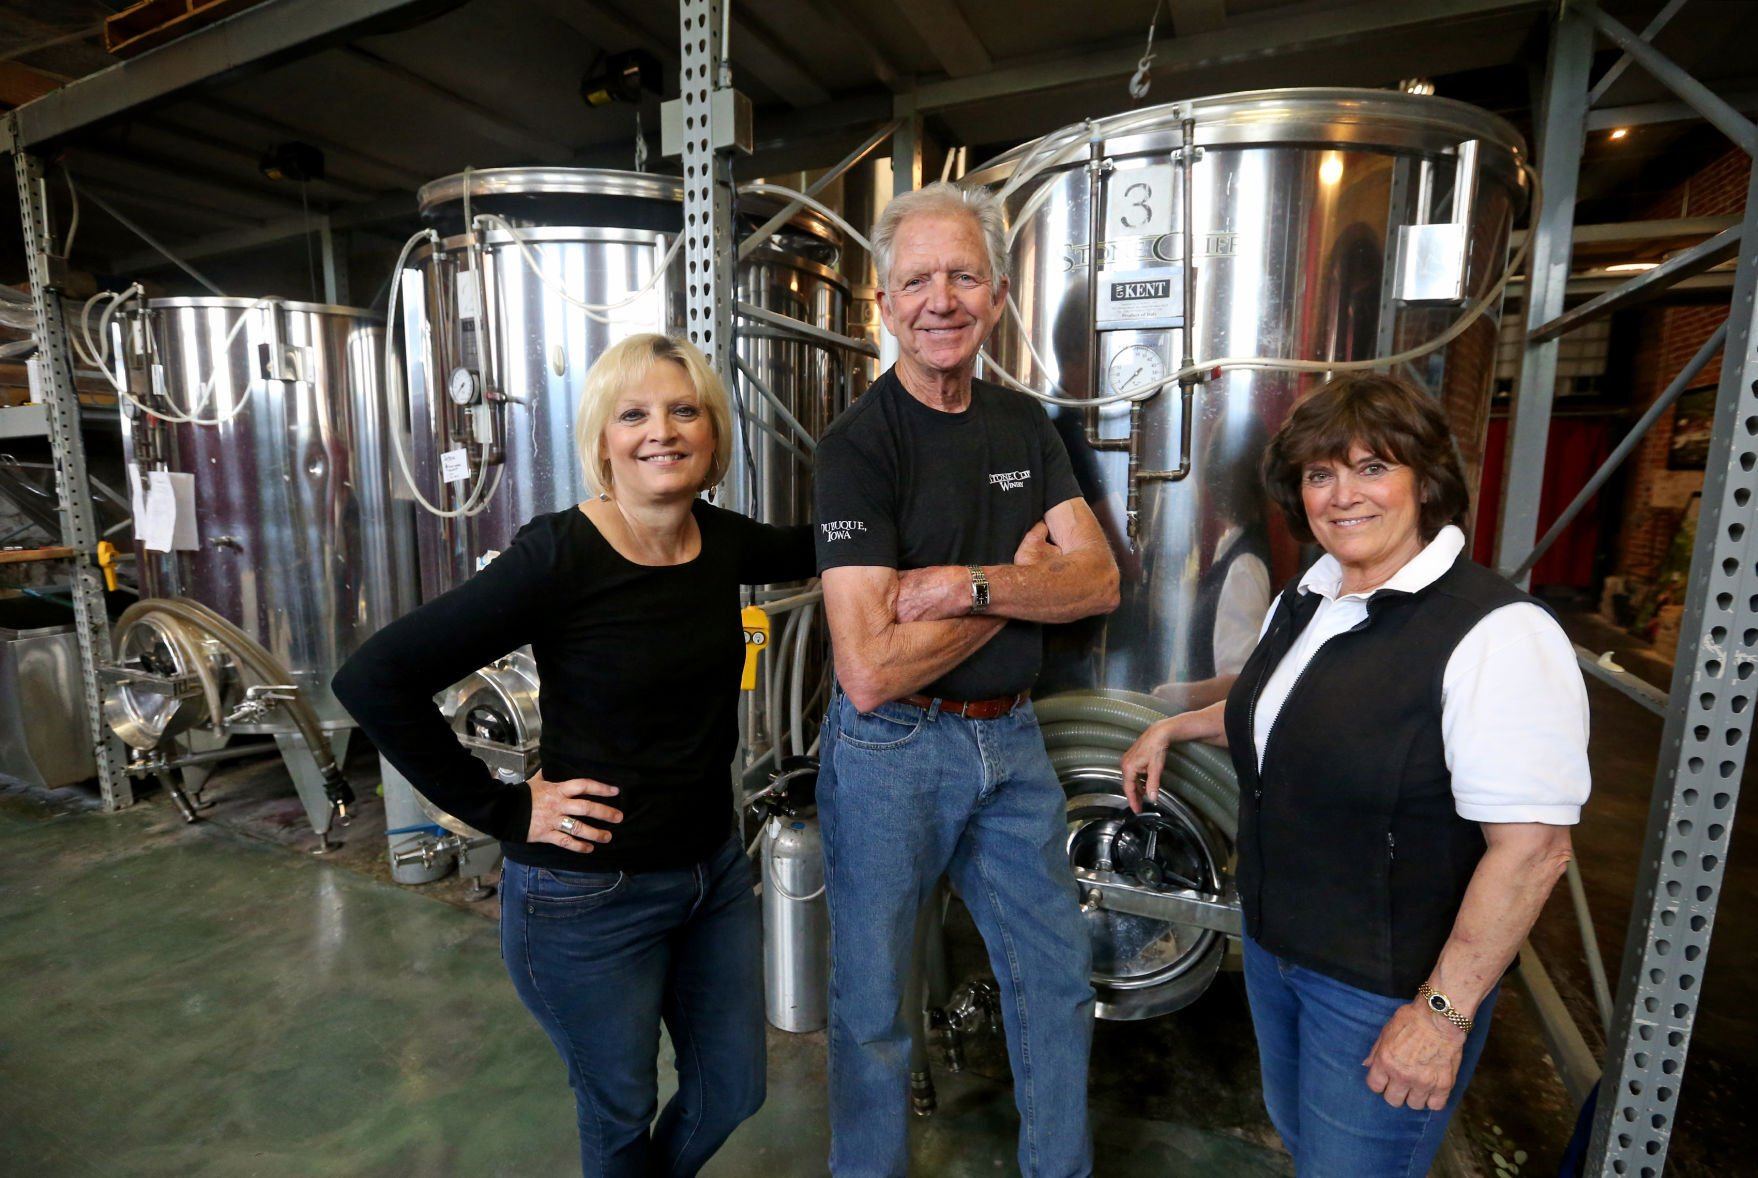 Dubuque Star Brewery co-owners Jodi Bryson (from left), Bob Smith and Nan Smith stand at Stone Cliff Winery in Dubuque on Friday, June 10, 2022. Stone Cliff, located in the historic Dubuque Star Brewery building, plans to start selling Dubuque Star Beer.    PHOTO CREDIT: JESSICA REILLY